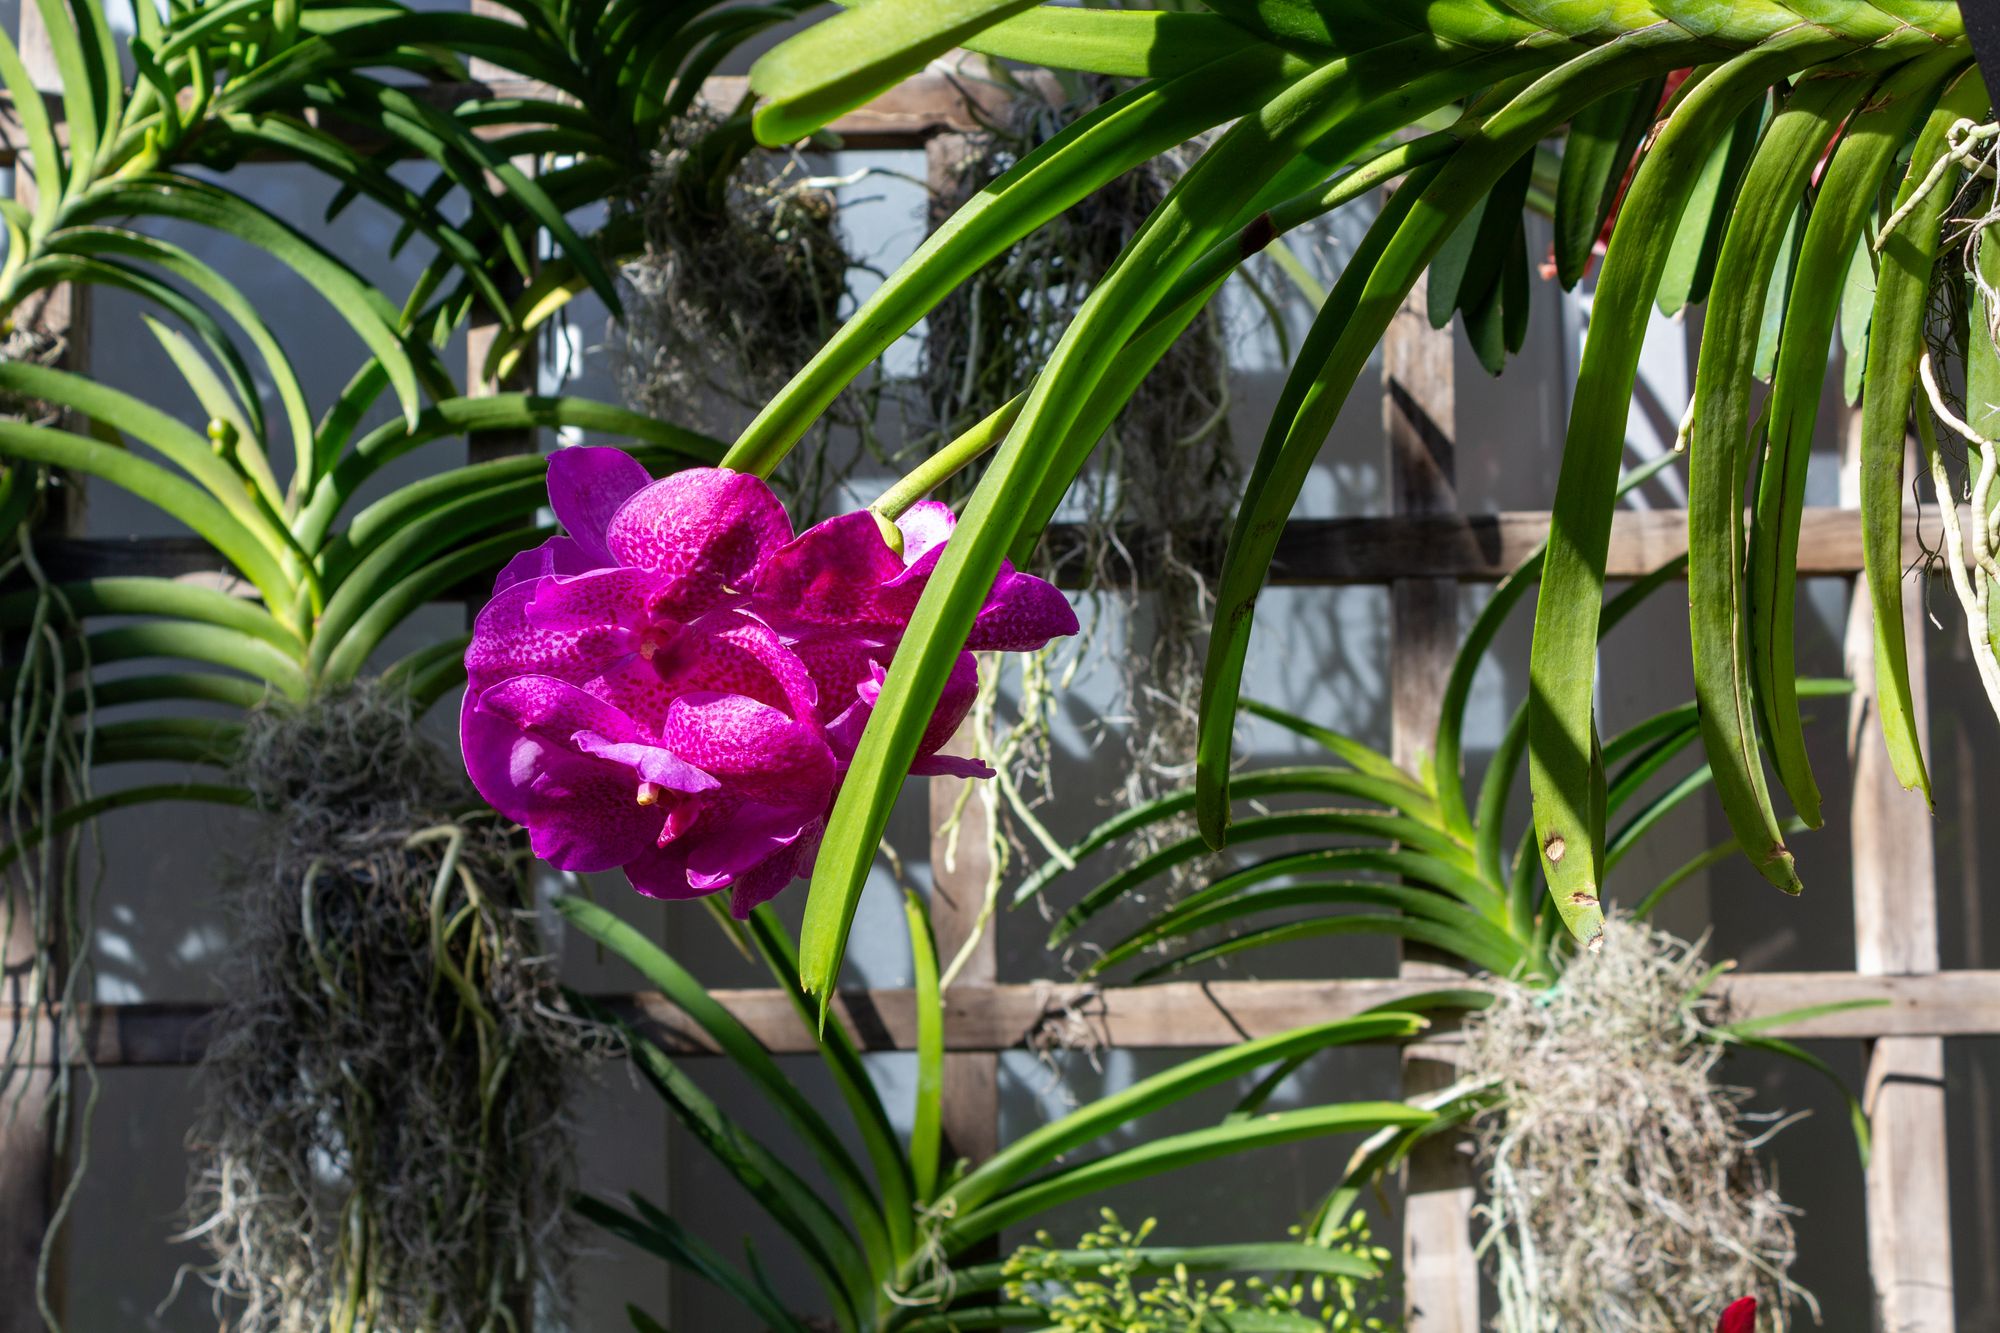 A bright pink orchid against long green leaves and a mossy wooden lattice